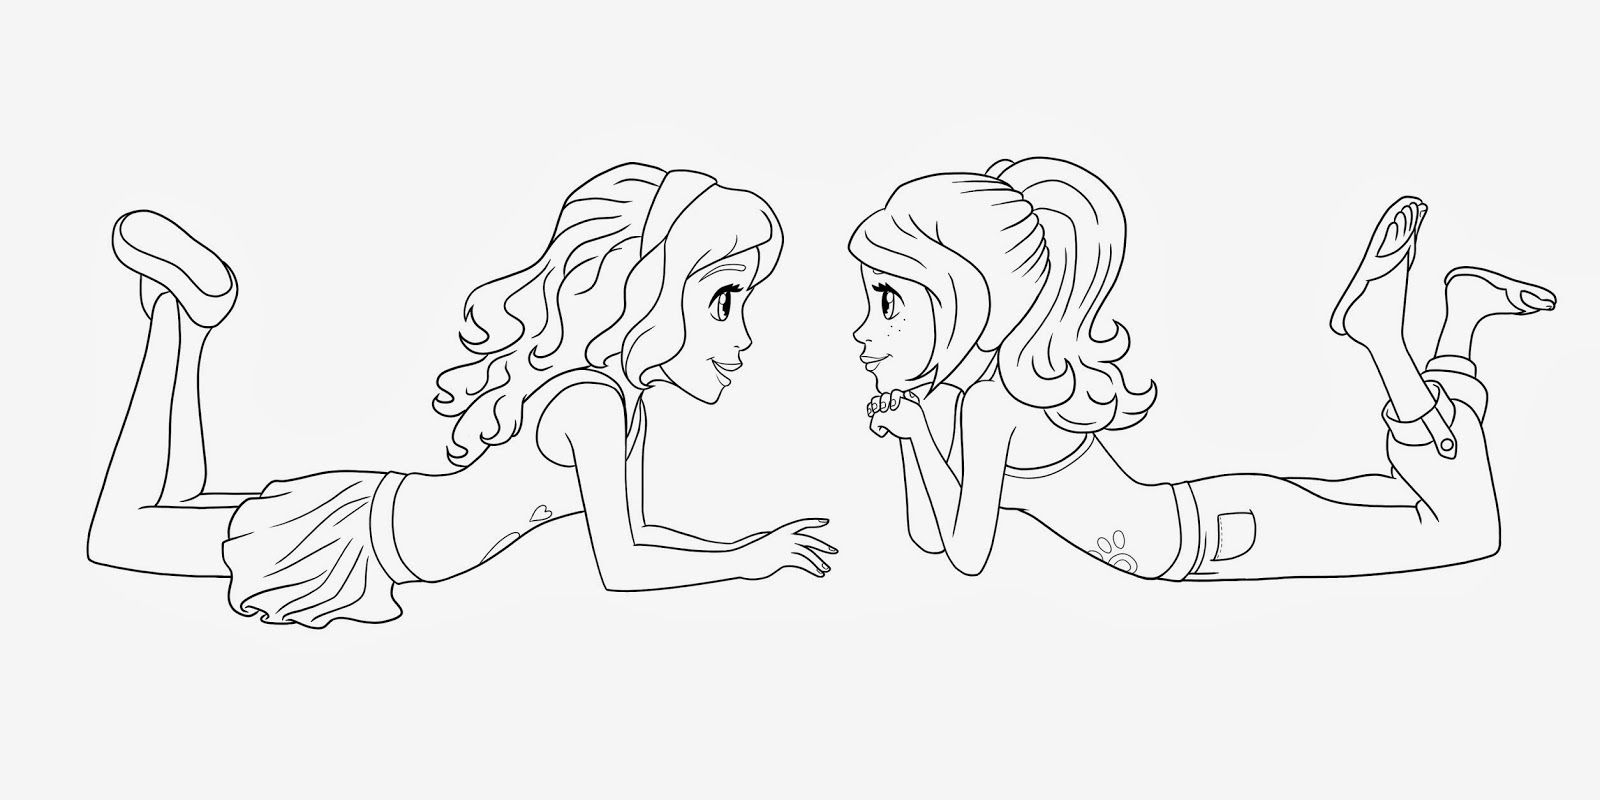 Lego Friends Mia Coloring Page - WeSharePics